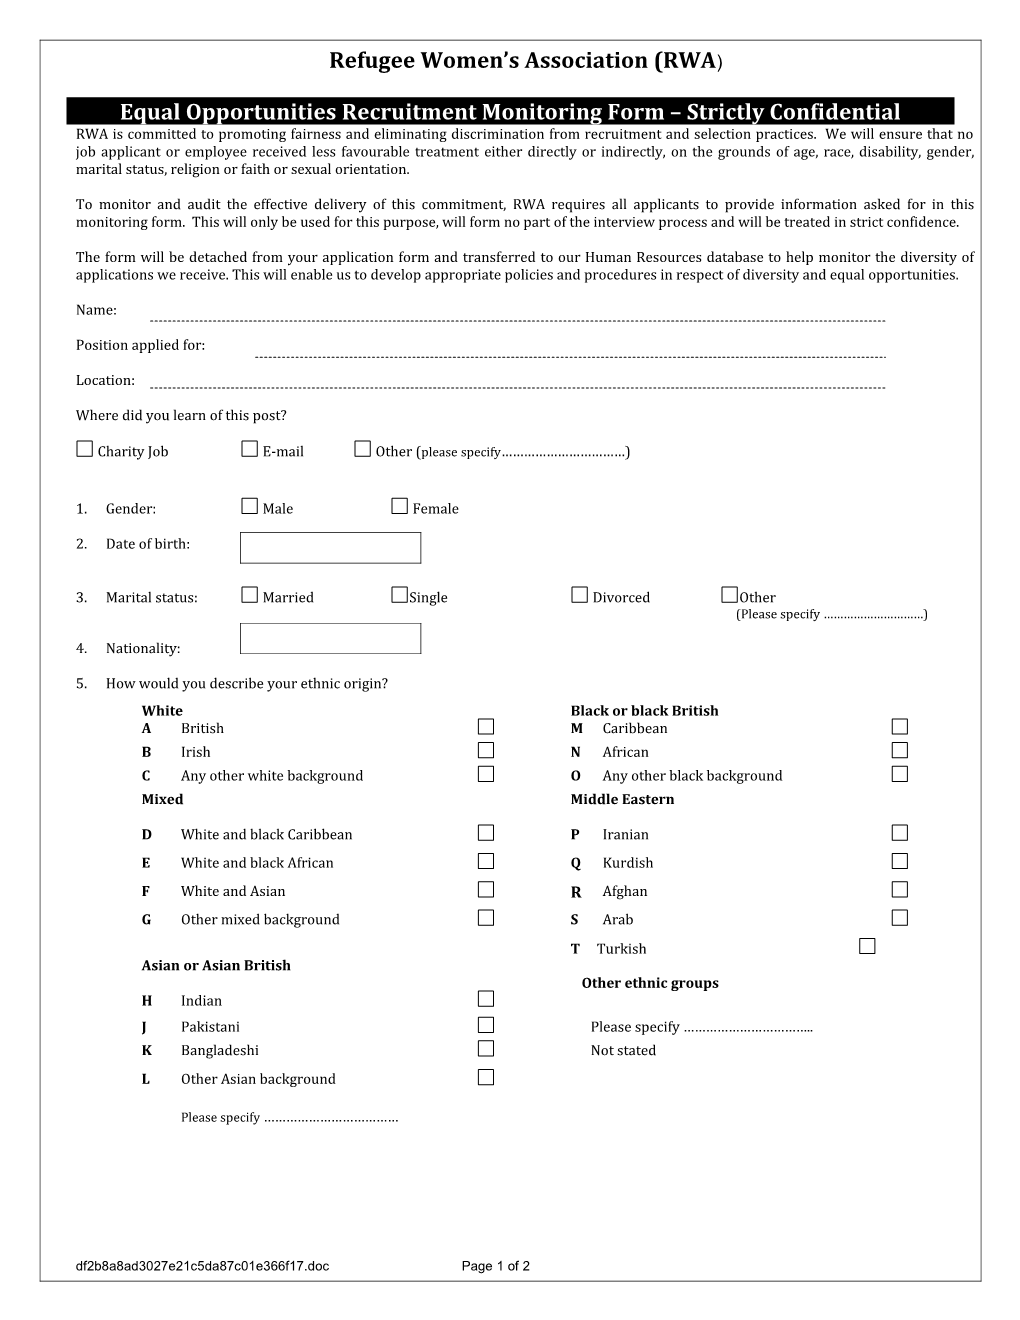 Equal Opportunities Monitoring Form Strictly Confidential